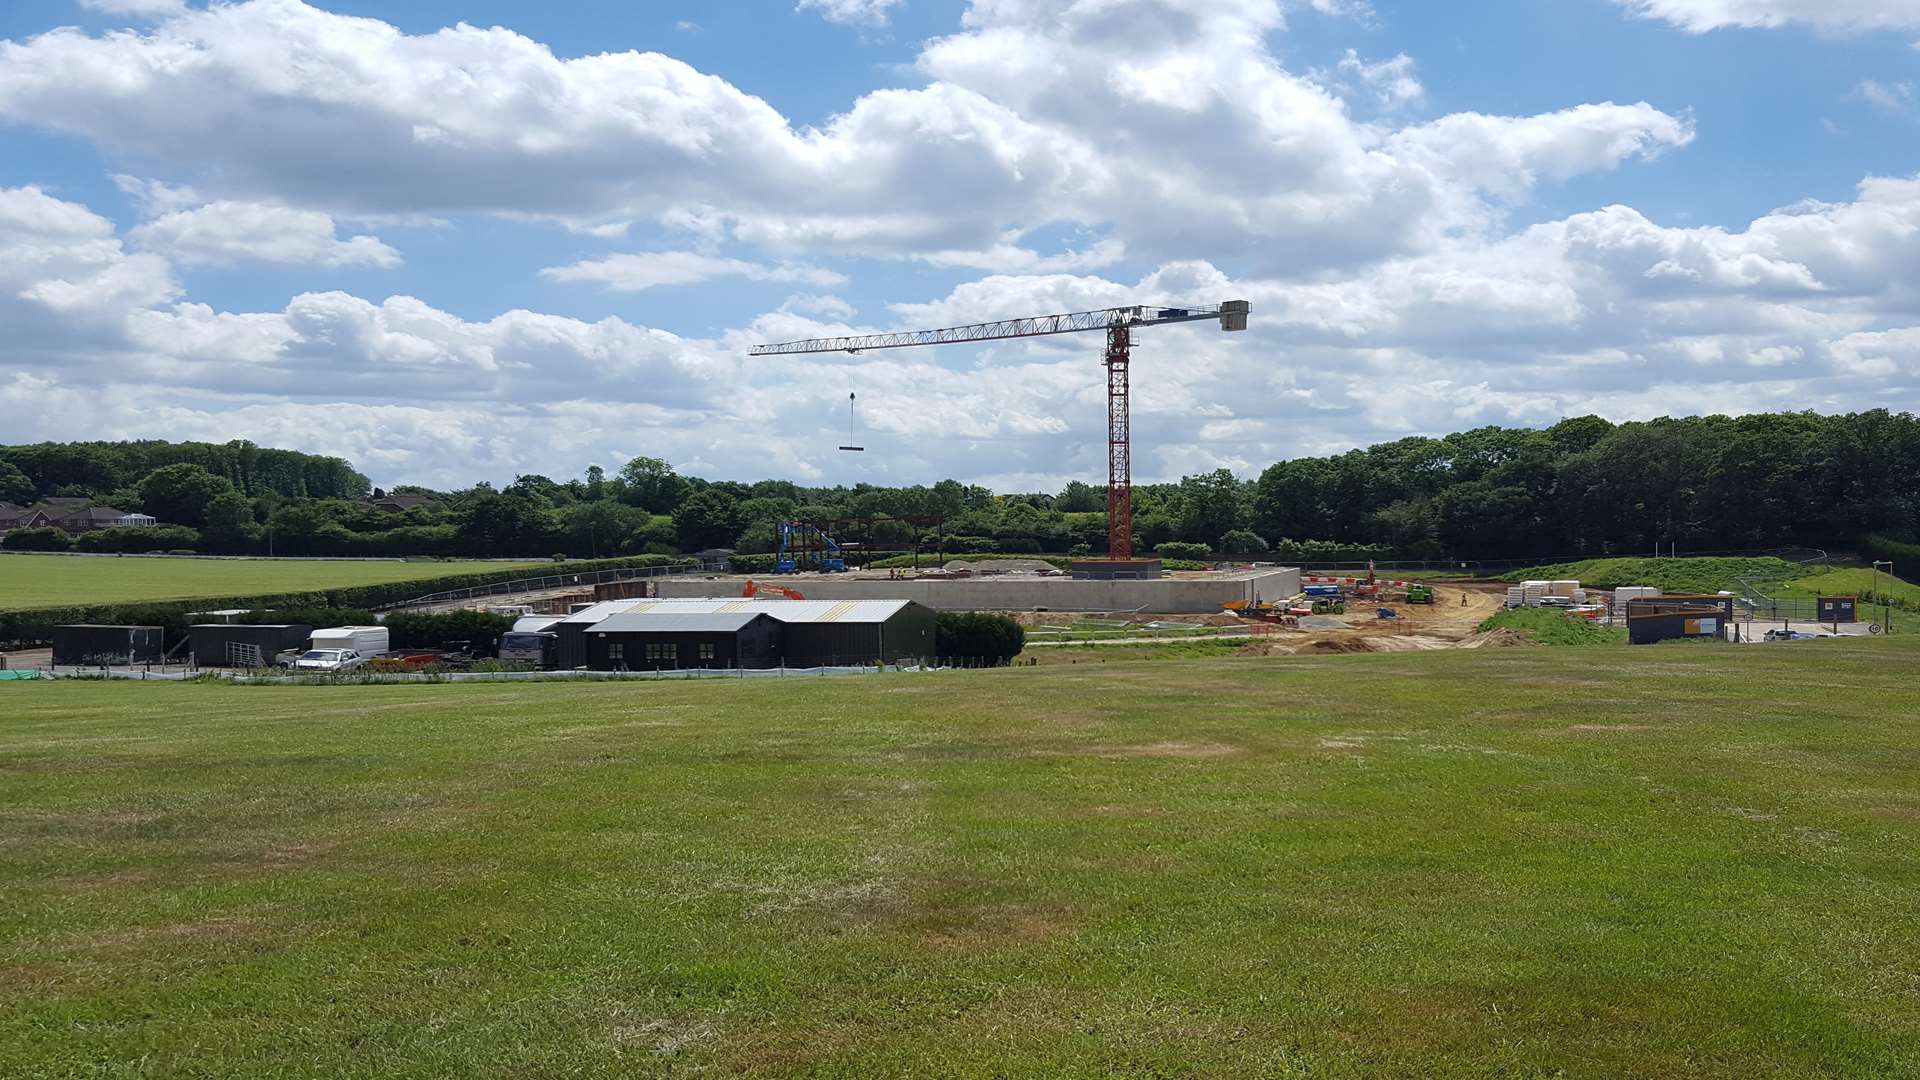 The Cygnet Health Care private mental health hospital under construction at Kent Medical Campus